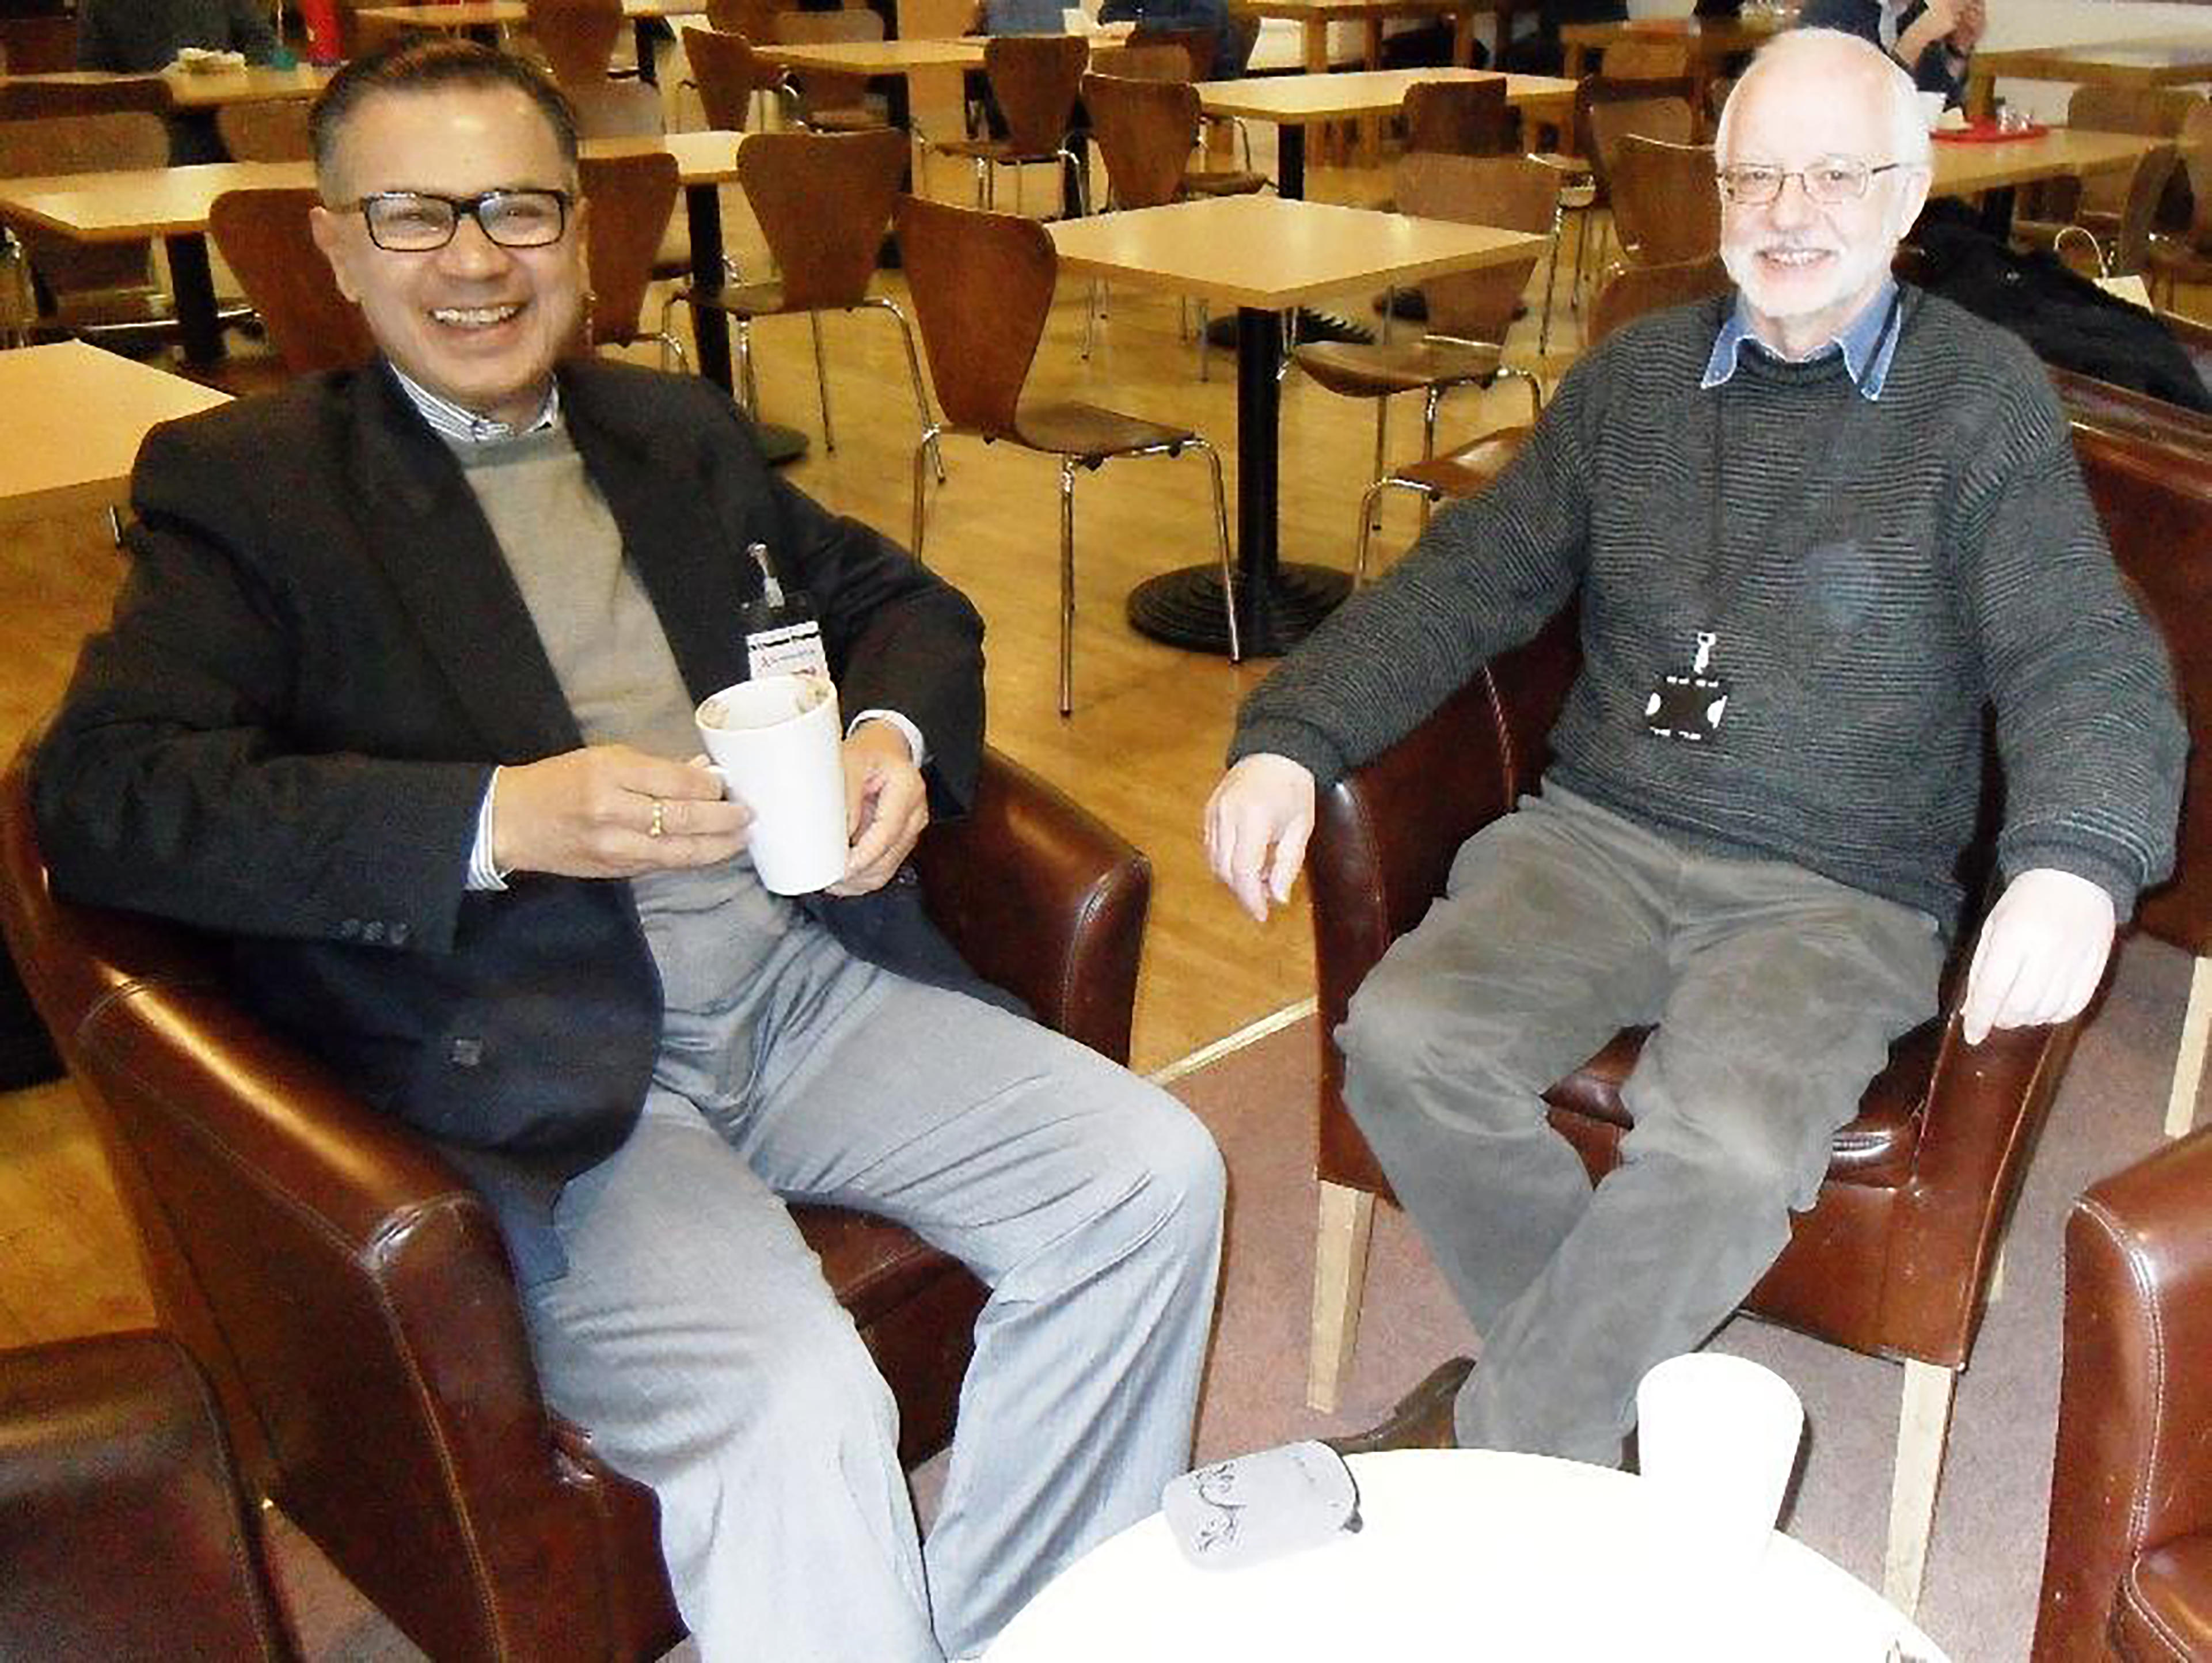 Dr Hirak Sen and Peter sitting back in armchairs at a cafe. Hirak is holding a mug. They are both smiling at the camera